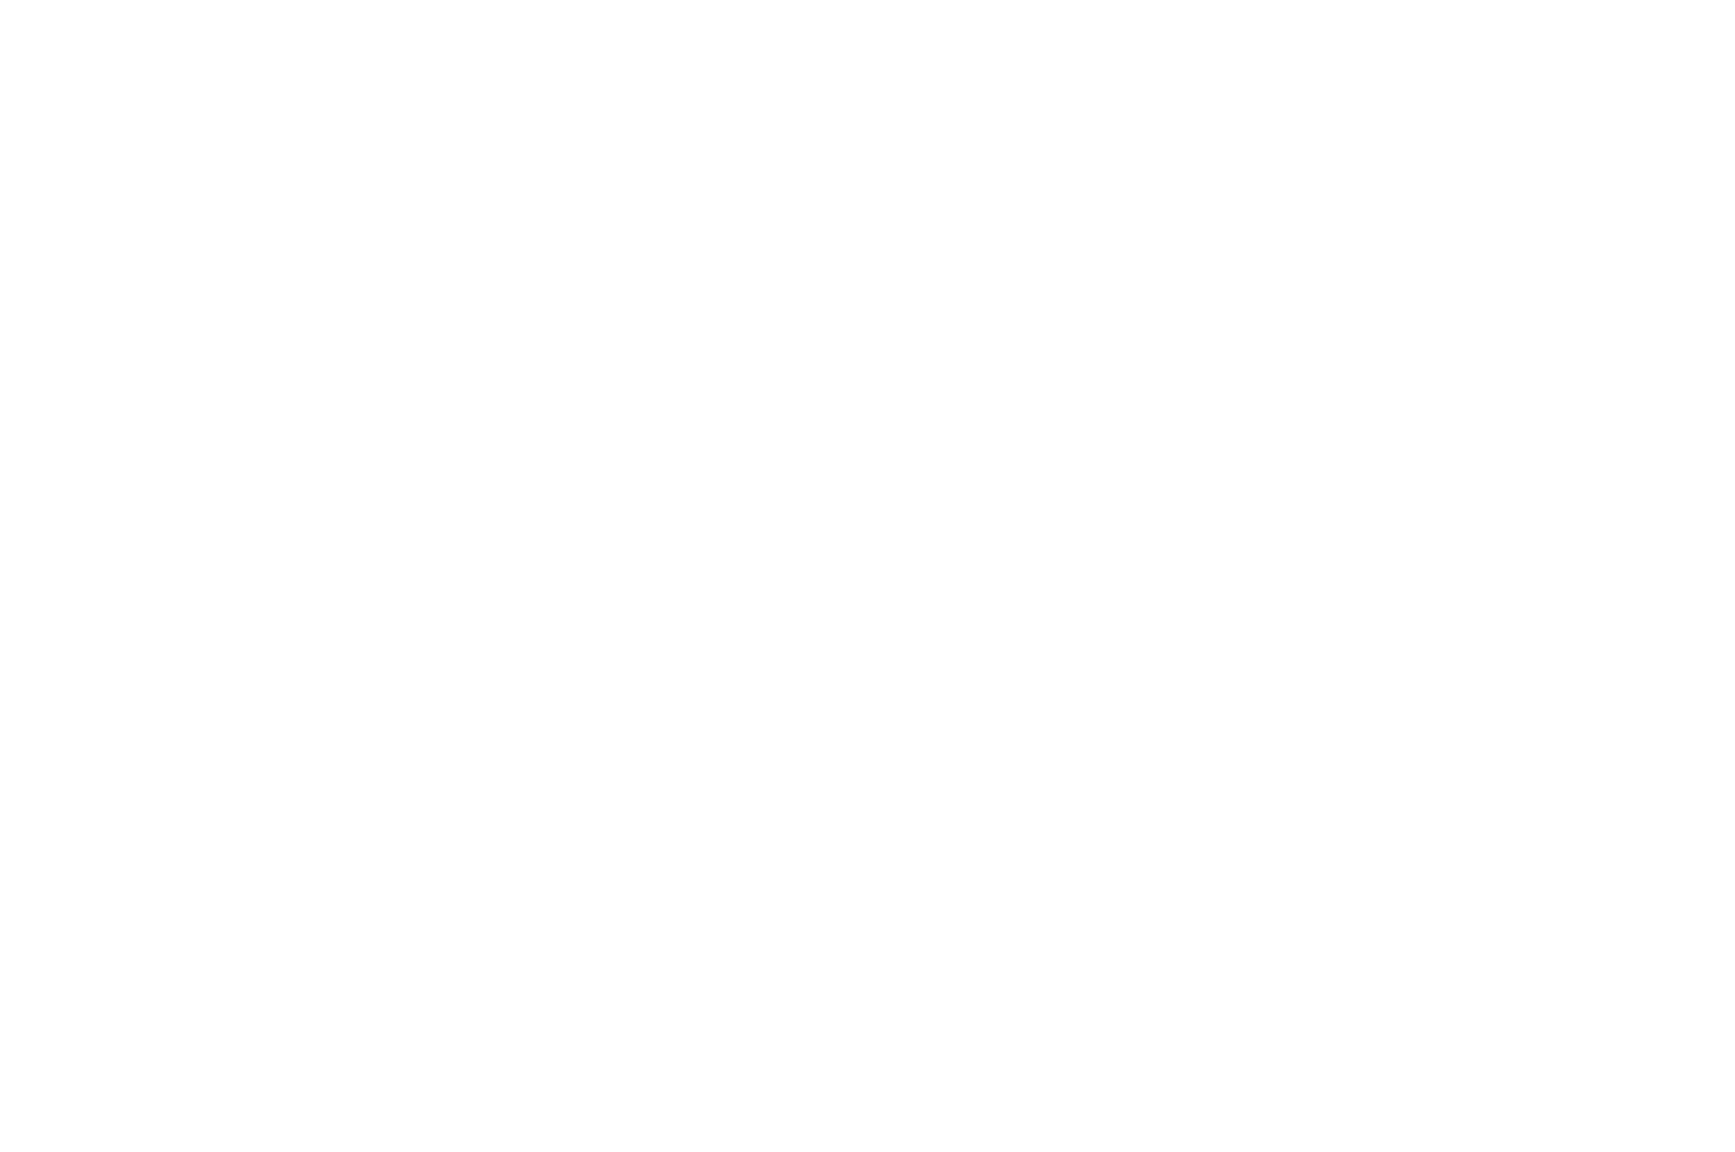 Best Use of New Technology at TAMMFF 2023.